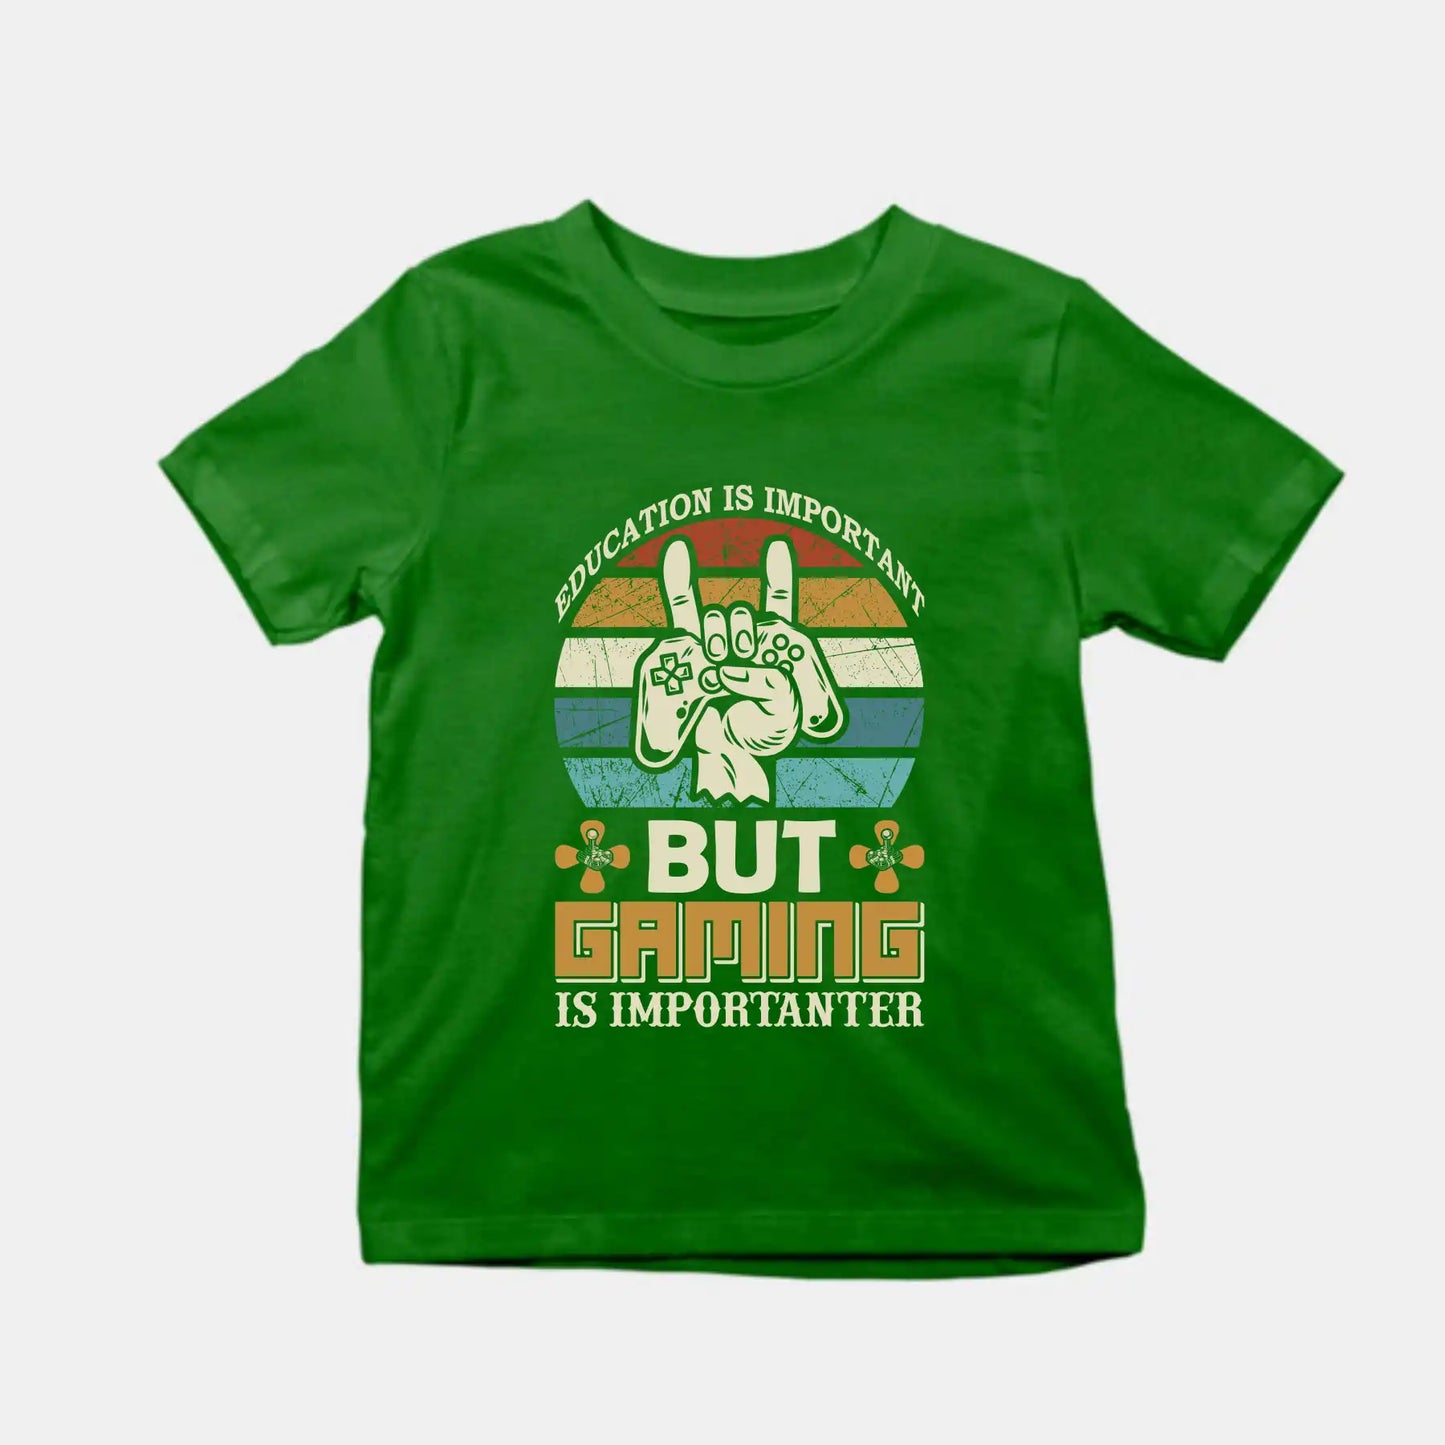 Education is Important but Gaming is Importanter Kids Cotton T-Shirt Bottle Green IZZIT APPAREL